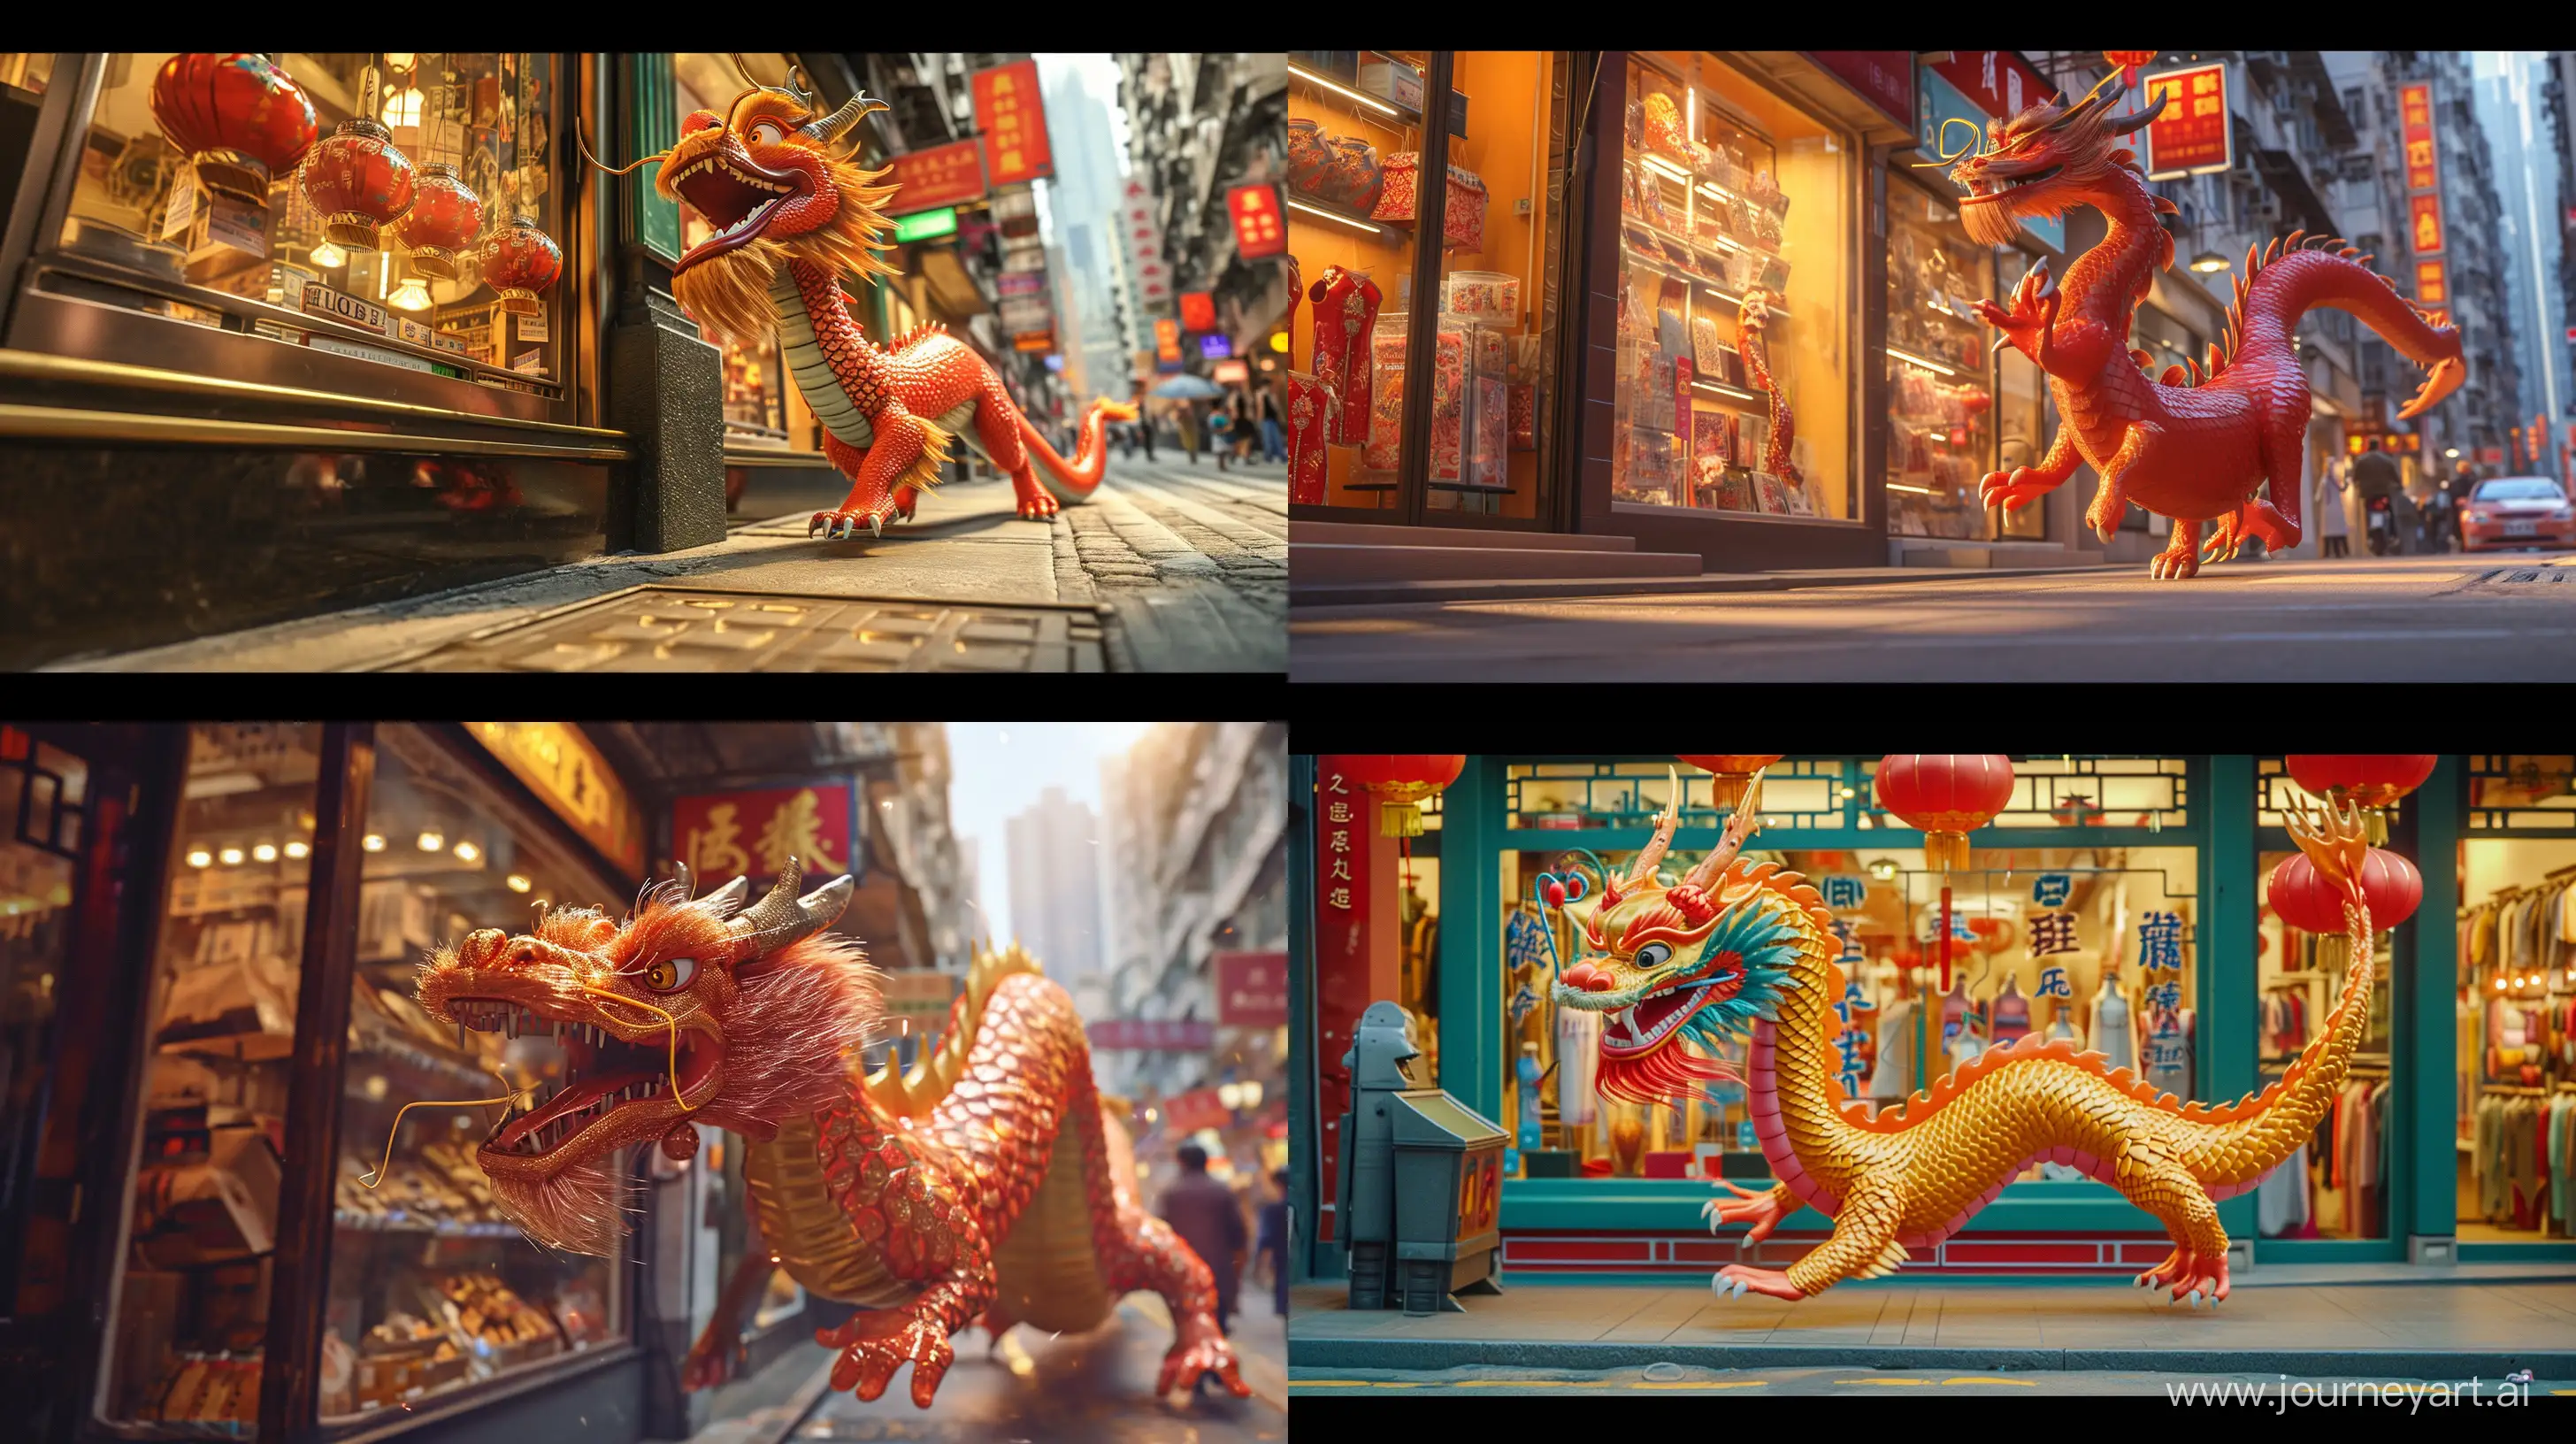 Majestic-Chinese-Dragon-Strolling-Through-Vibrant-Hong-Kong-Street-in-Pixar-Style